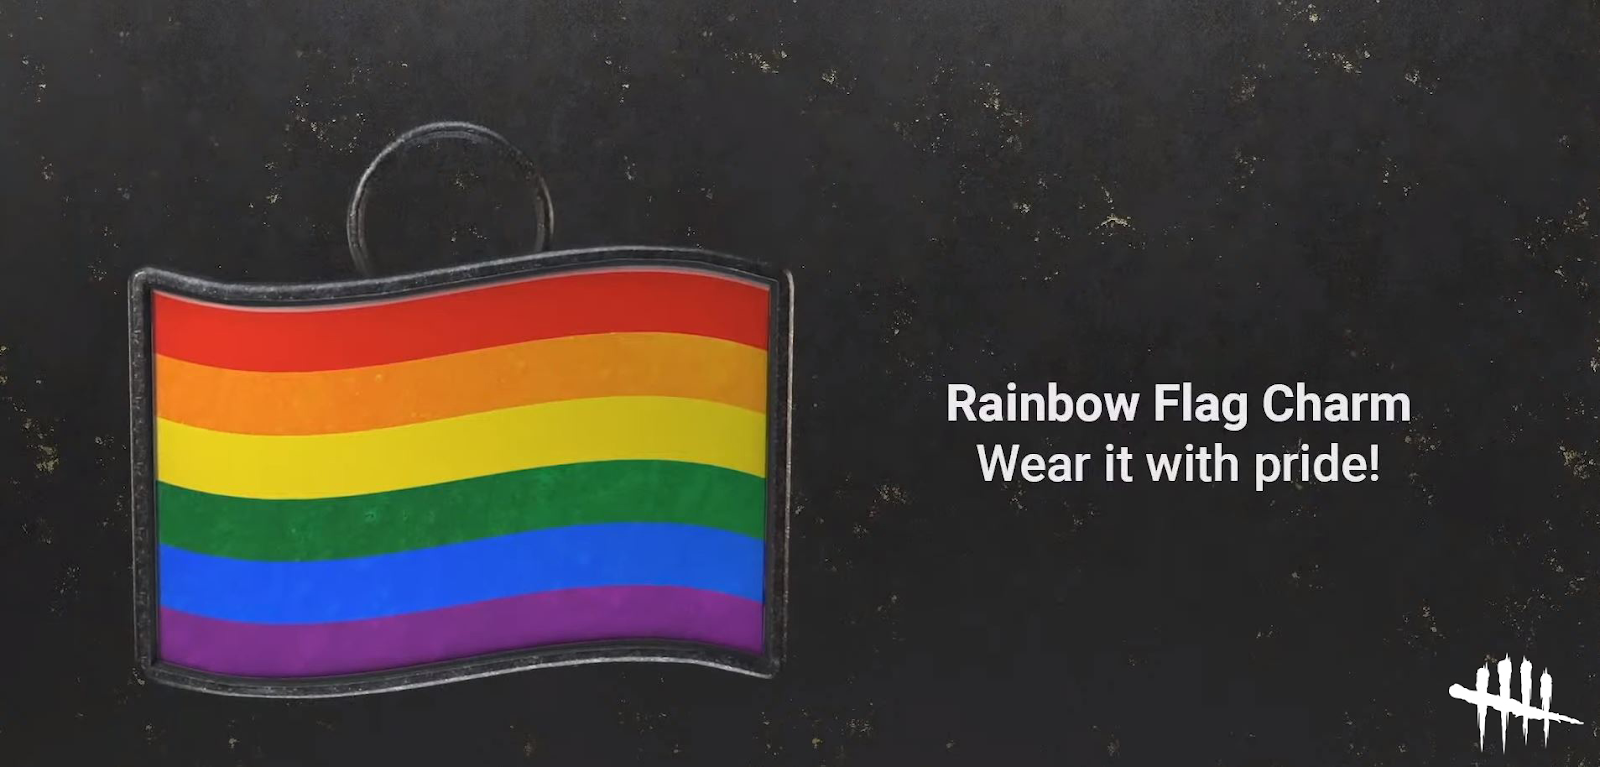 The Pride charm in Dead By Daylight.